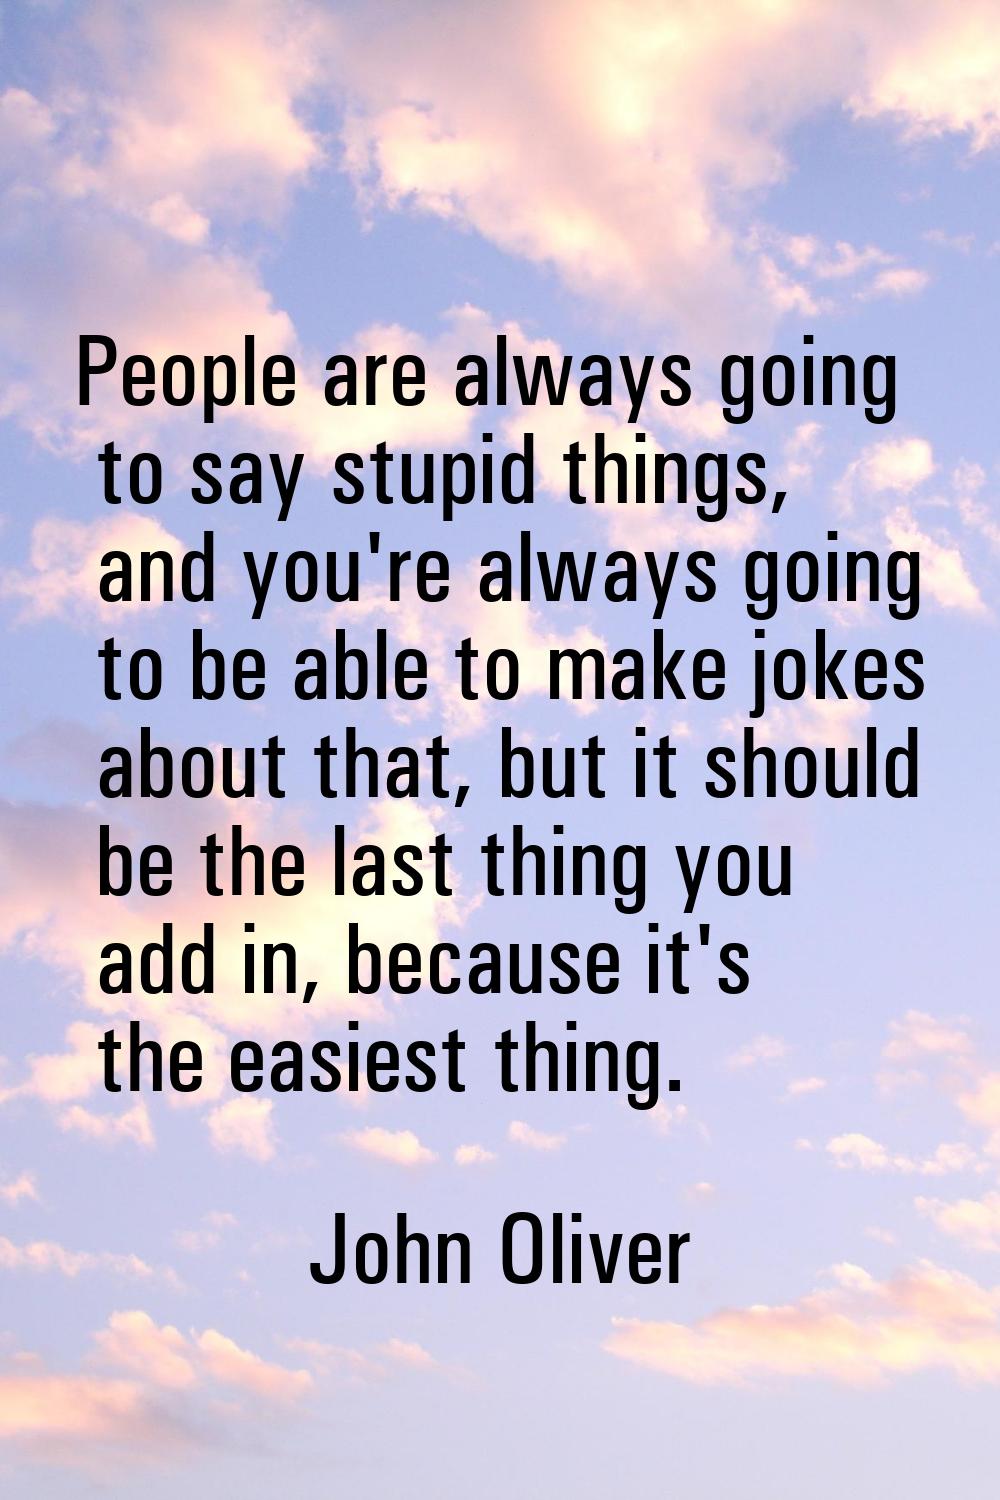 People are always going to say stupid things, and you're always going to be able to make jokes abou